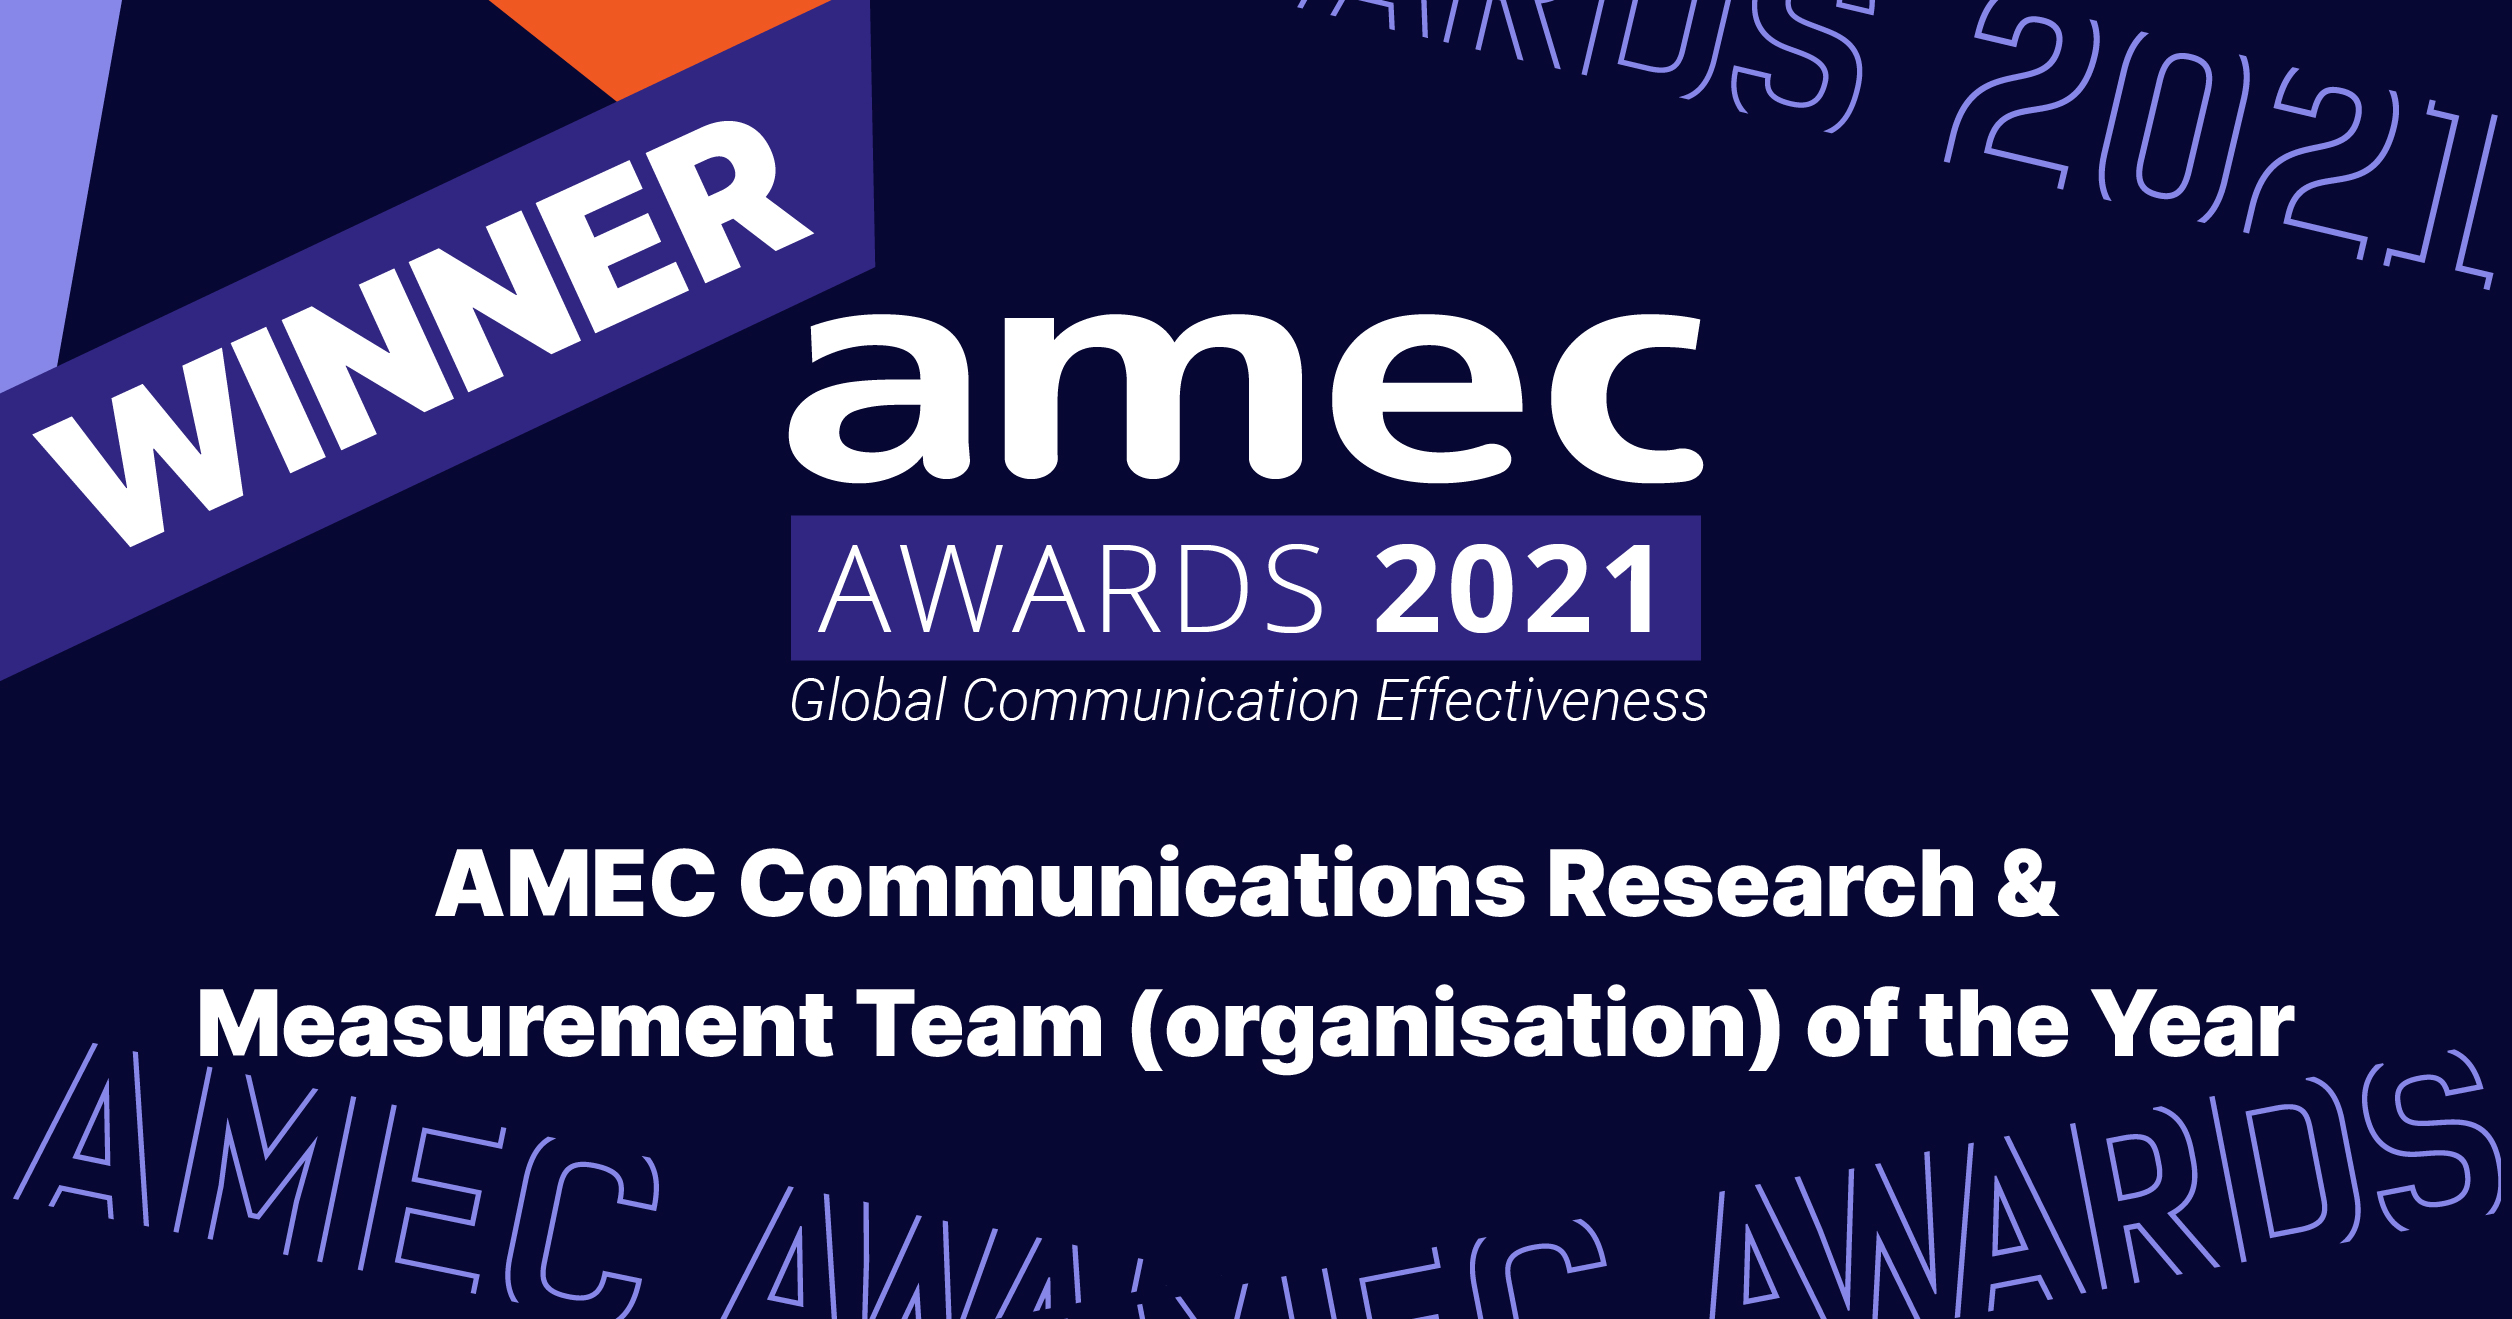 AMEC Communications Research & Measurement Team of the Year – mid-sized